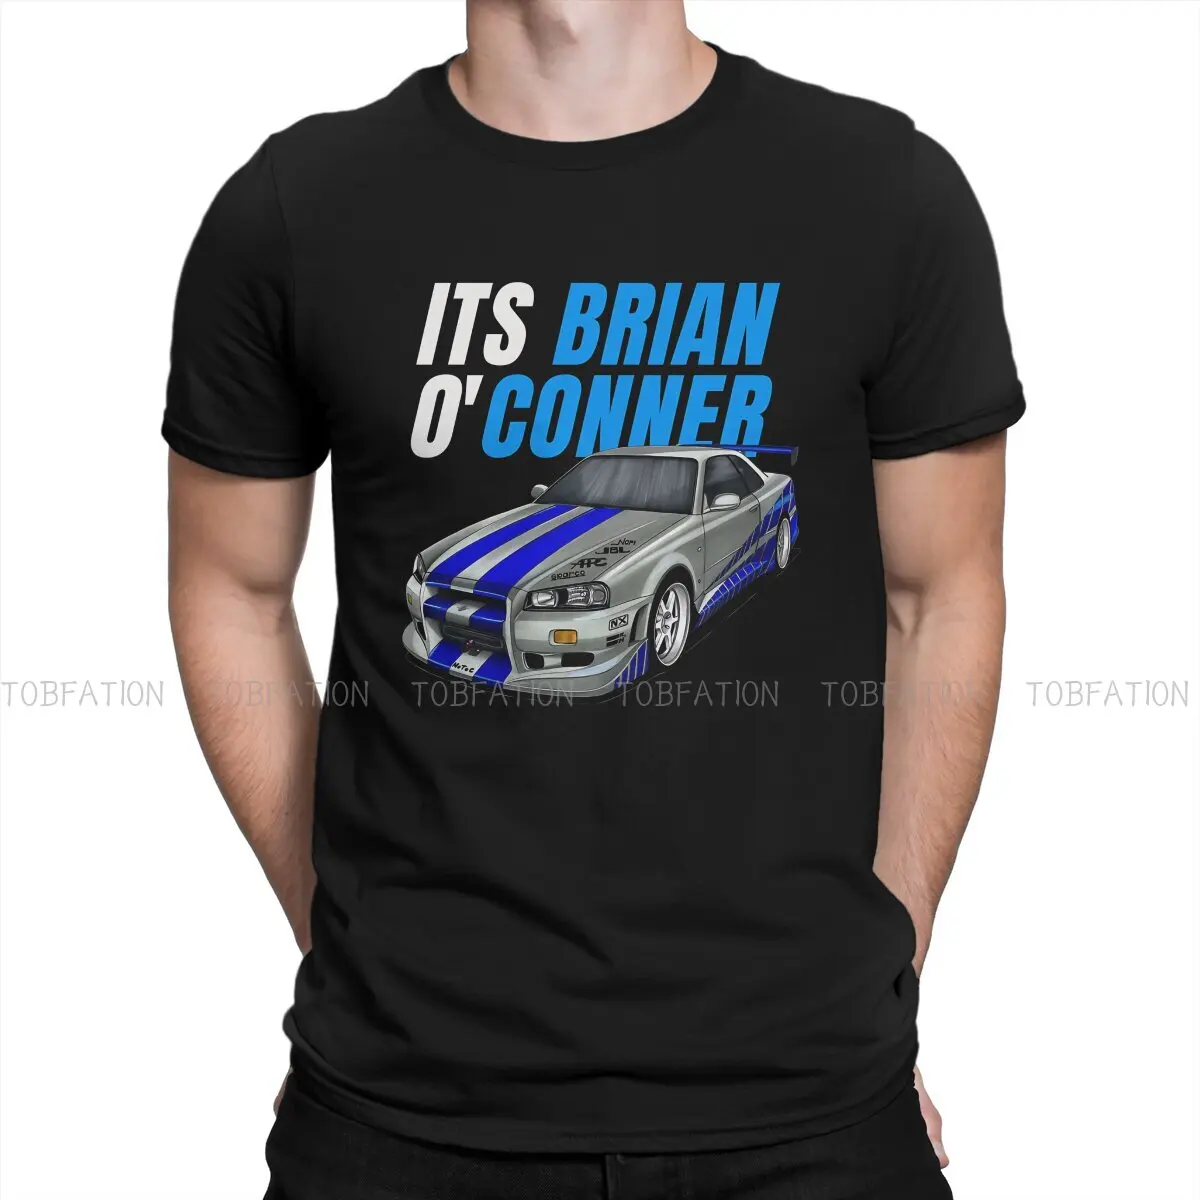 

The Fast And The Furious Crewneck TShirts Its Brian o Conner Print Men's T Shirt Hipster Tops Size S-6XL